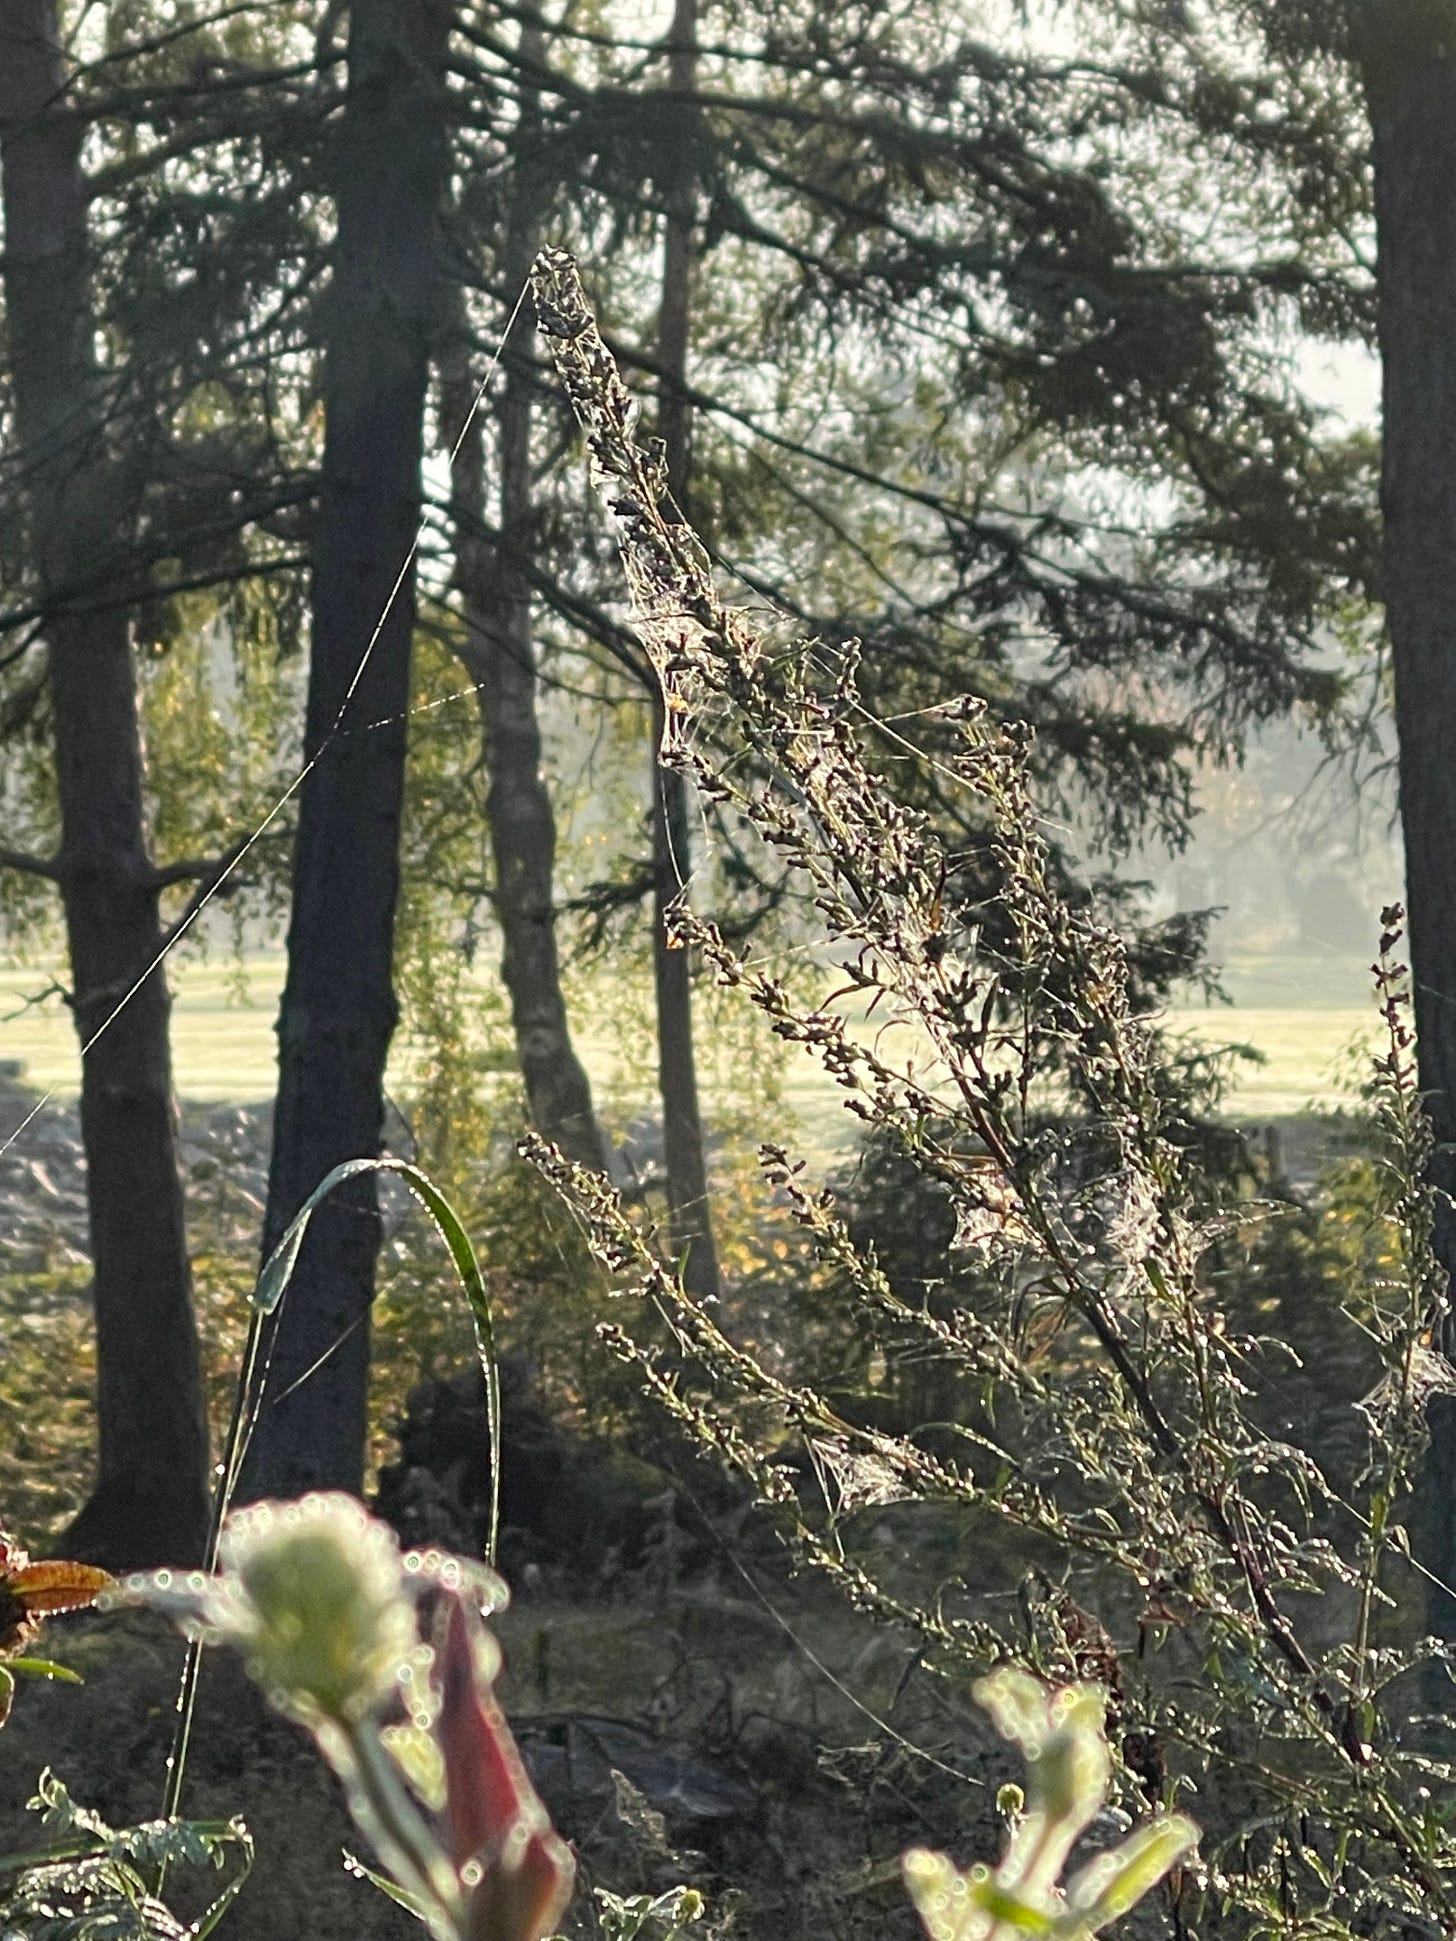 Foreground: a bush with small meaves covered in wispy webs highlighted by droplets of water in the sun shining from behind. Background: tall pine trees with sunlight streaming through.